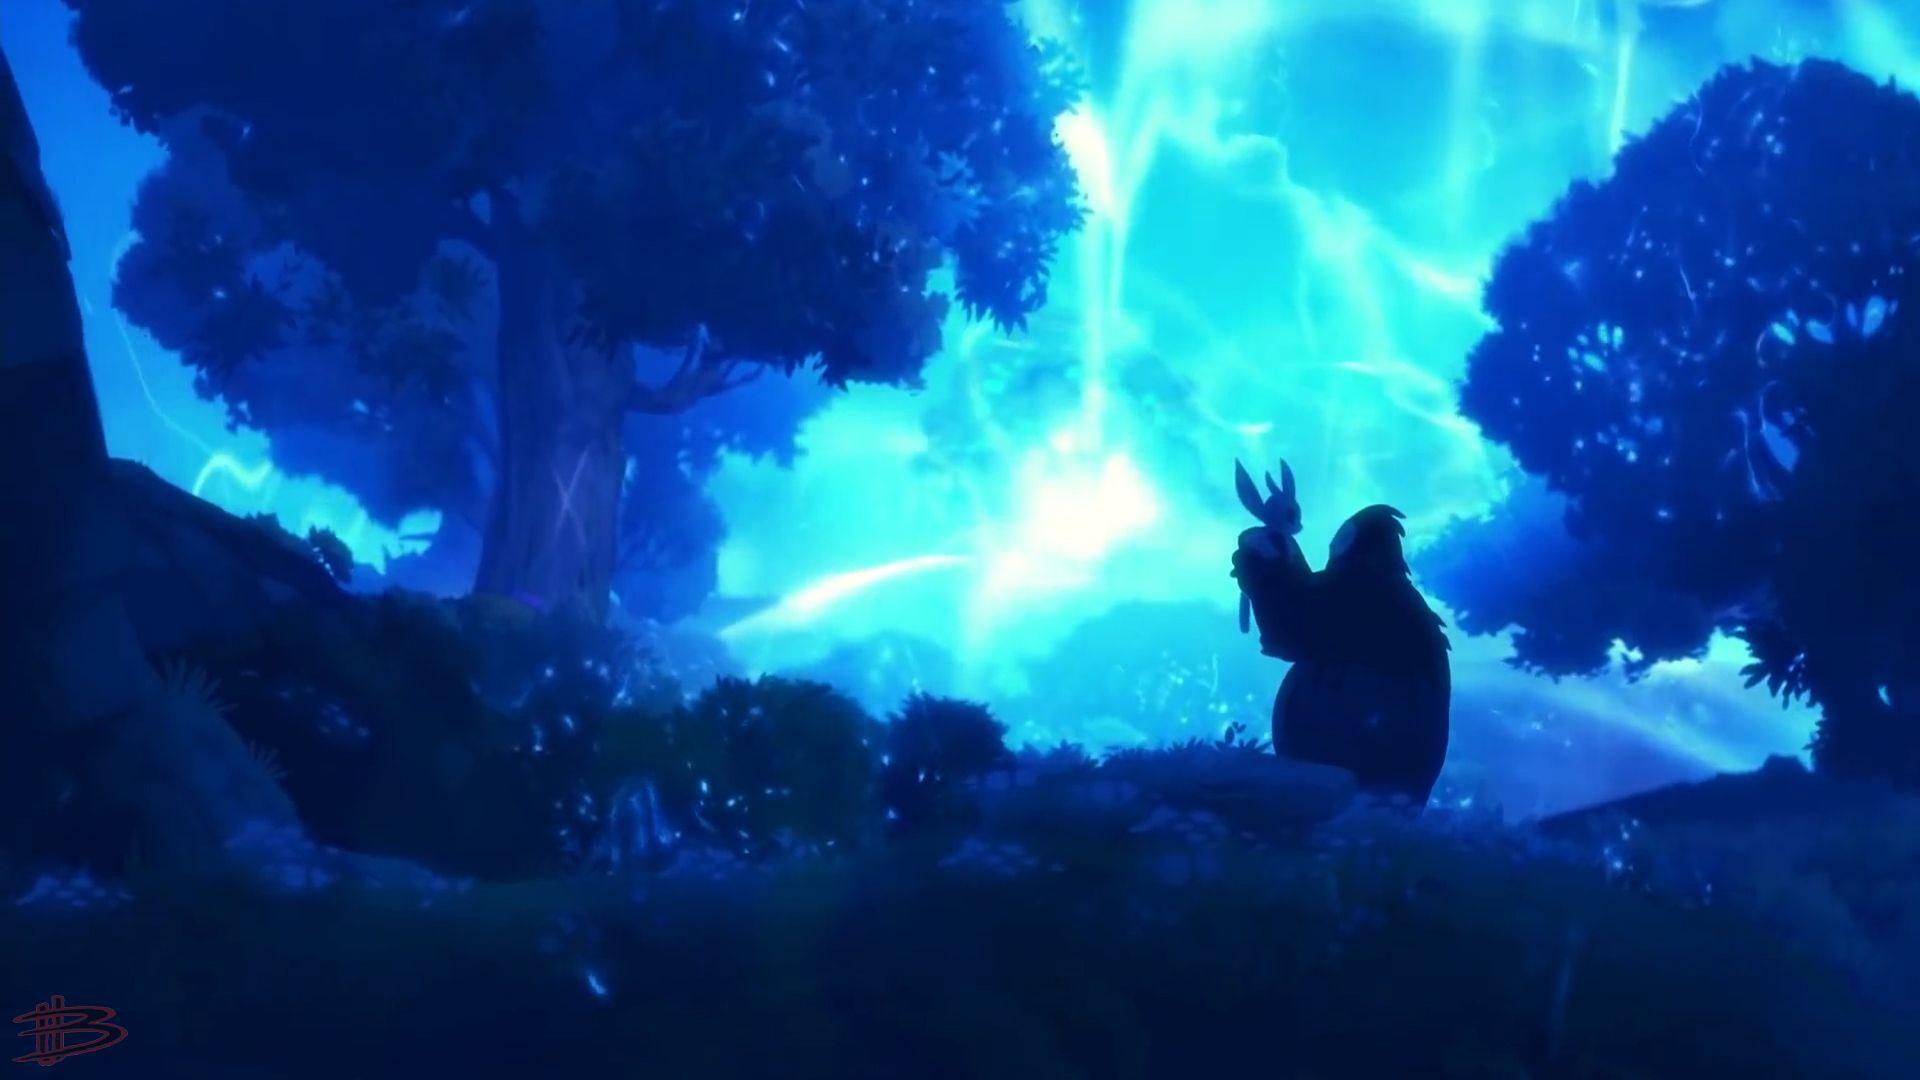 Ori And The Blind Forest Wallpaper High Definition, Incredible 30